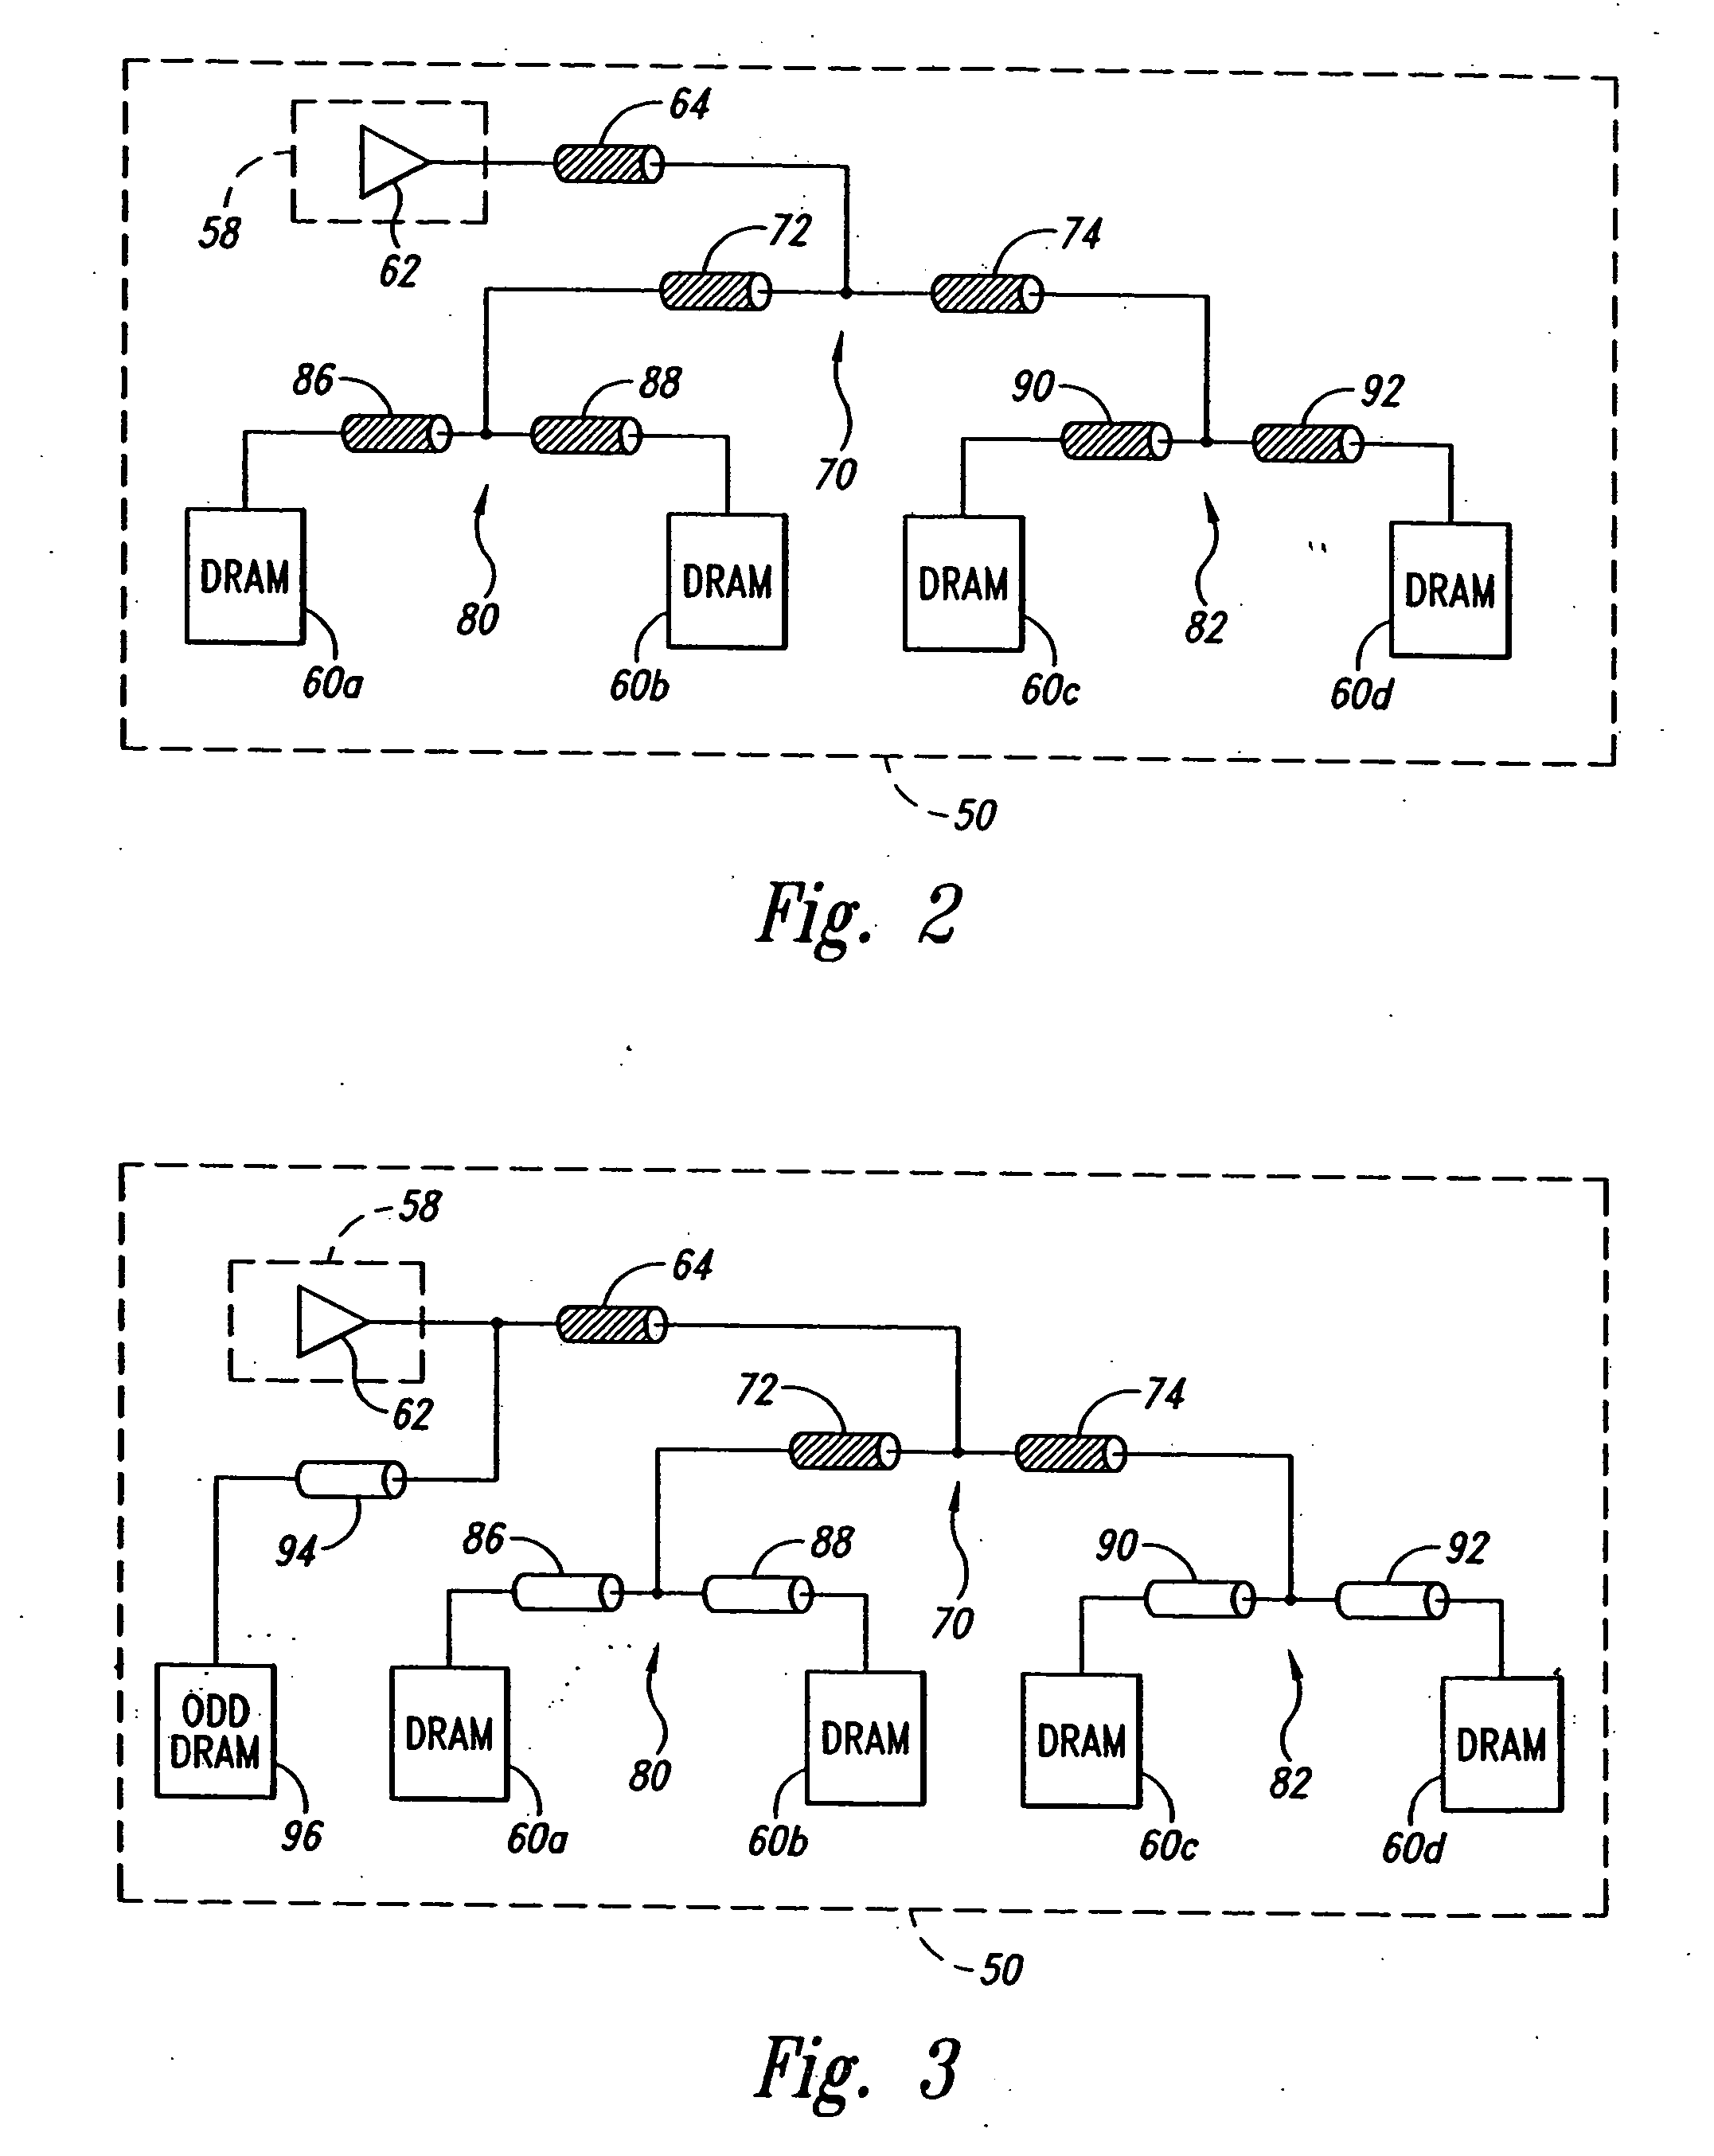 Memory module and method having improved signal routing topology